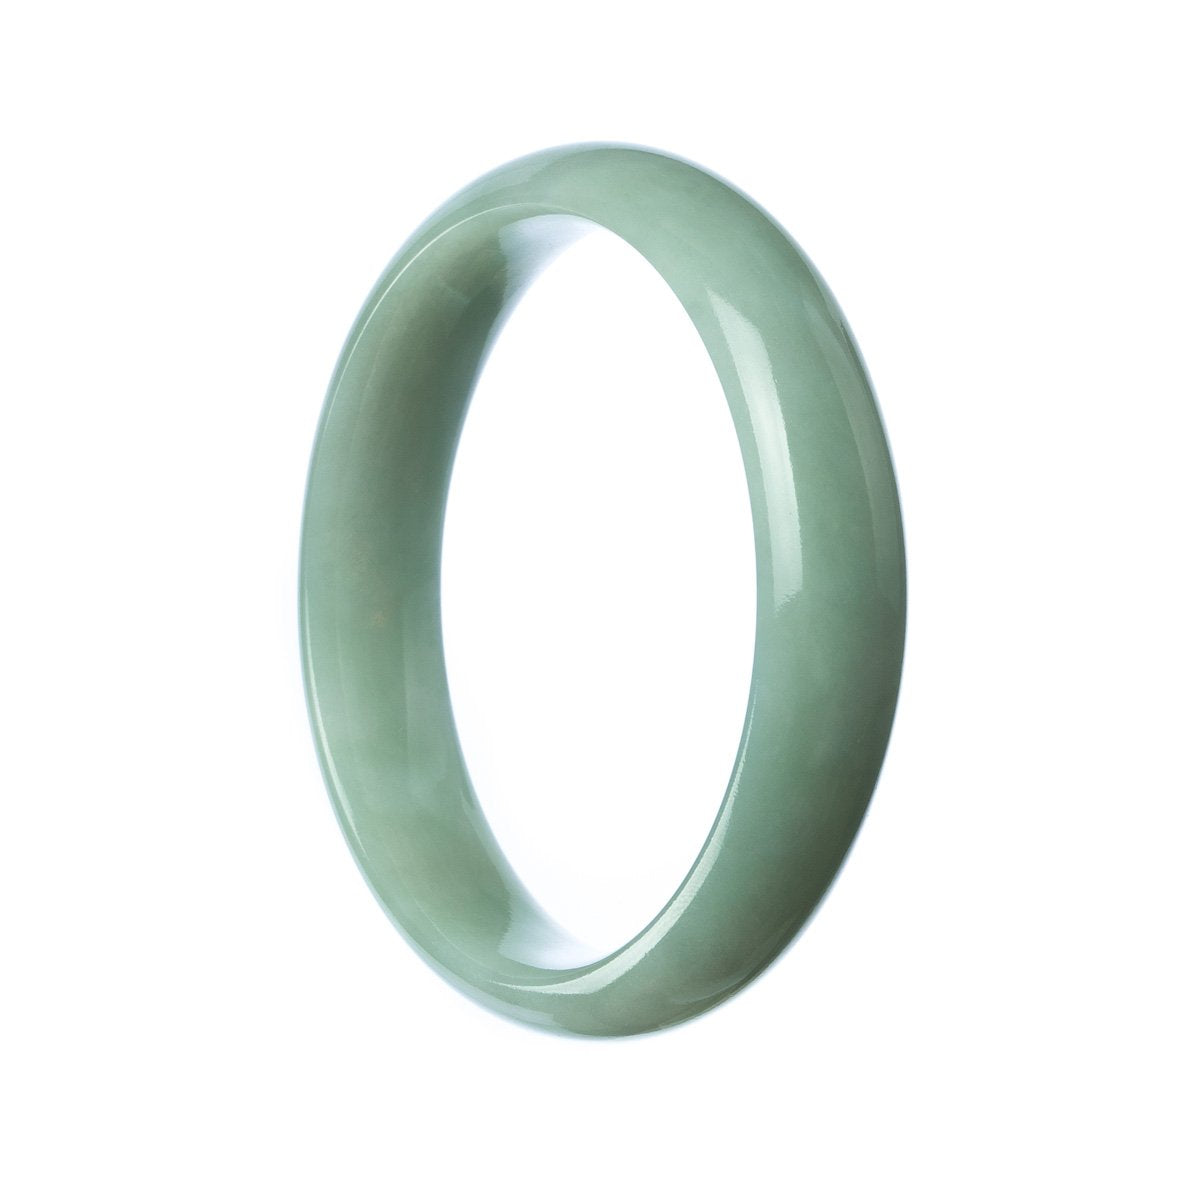 A pale green traditional jade bracelet with a Type A classification and a half moon design, measuring 57mm in size.